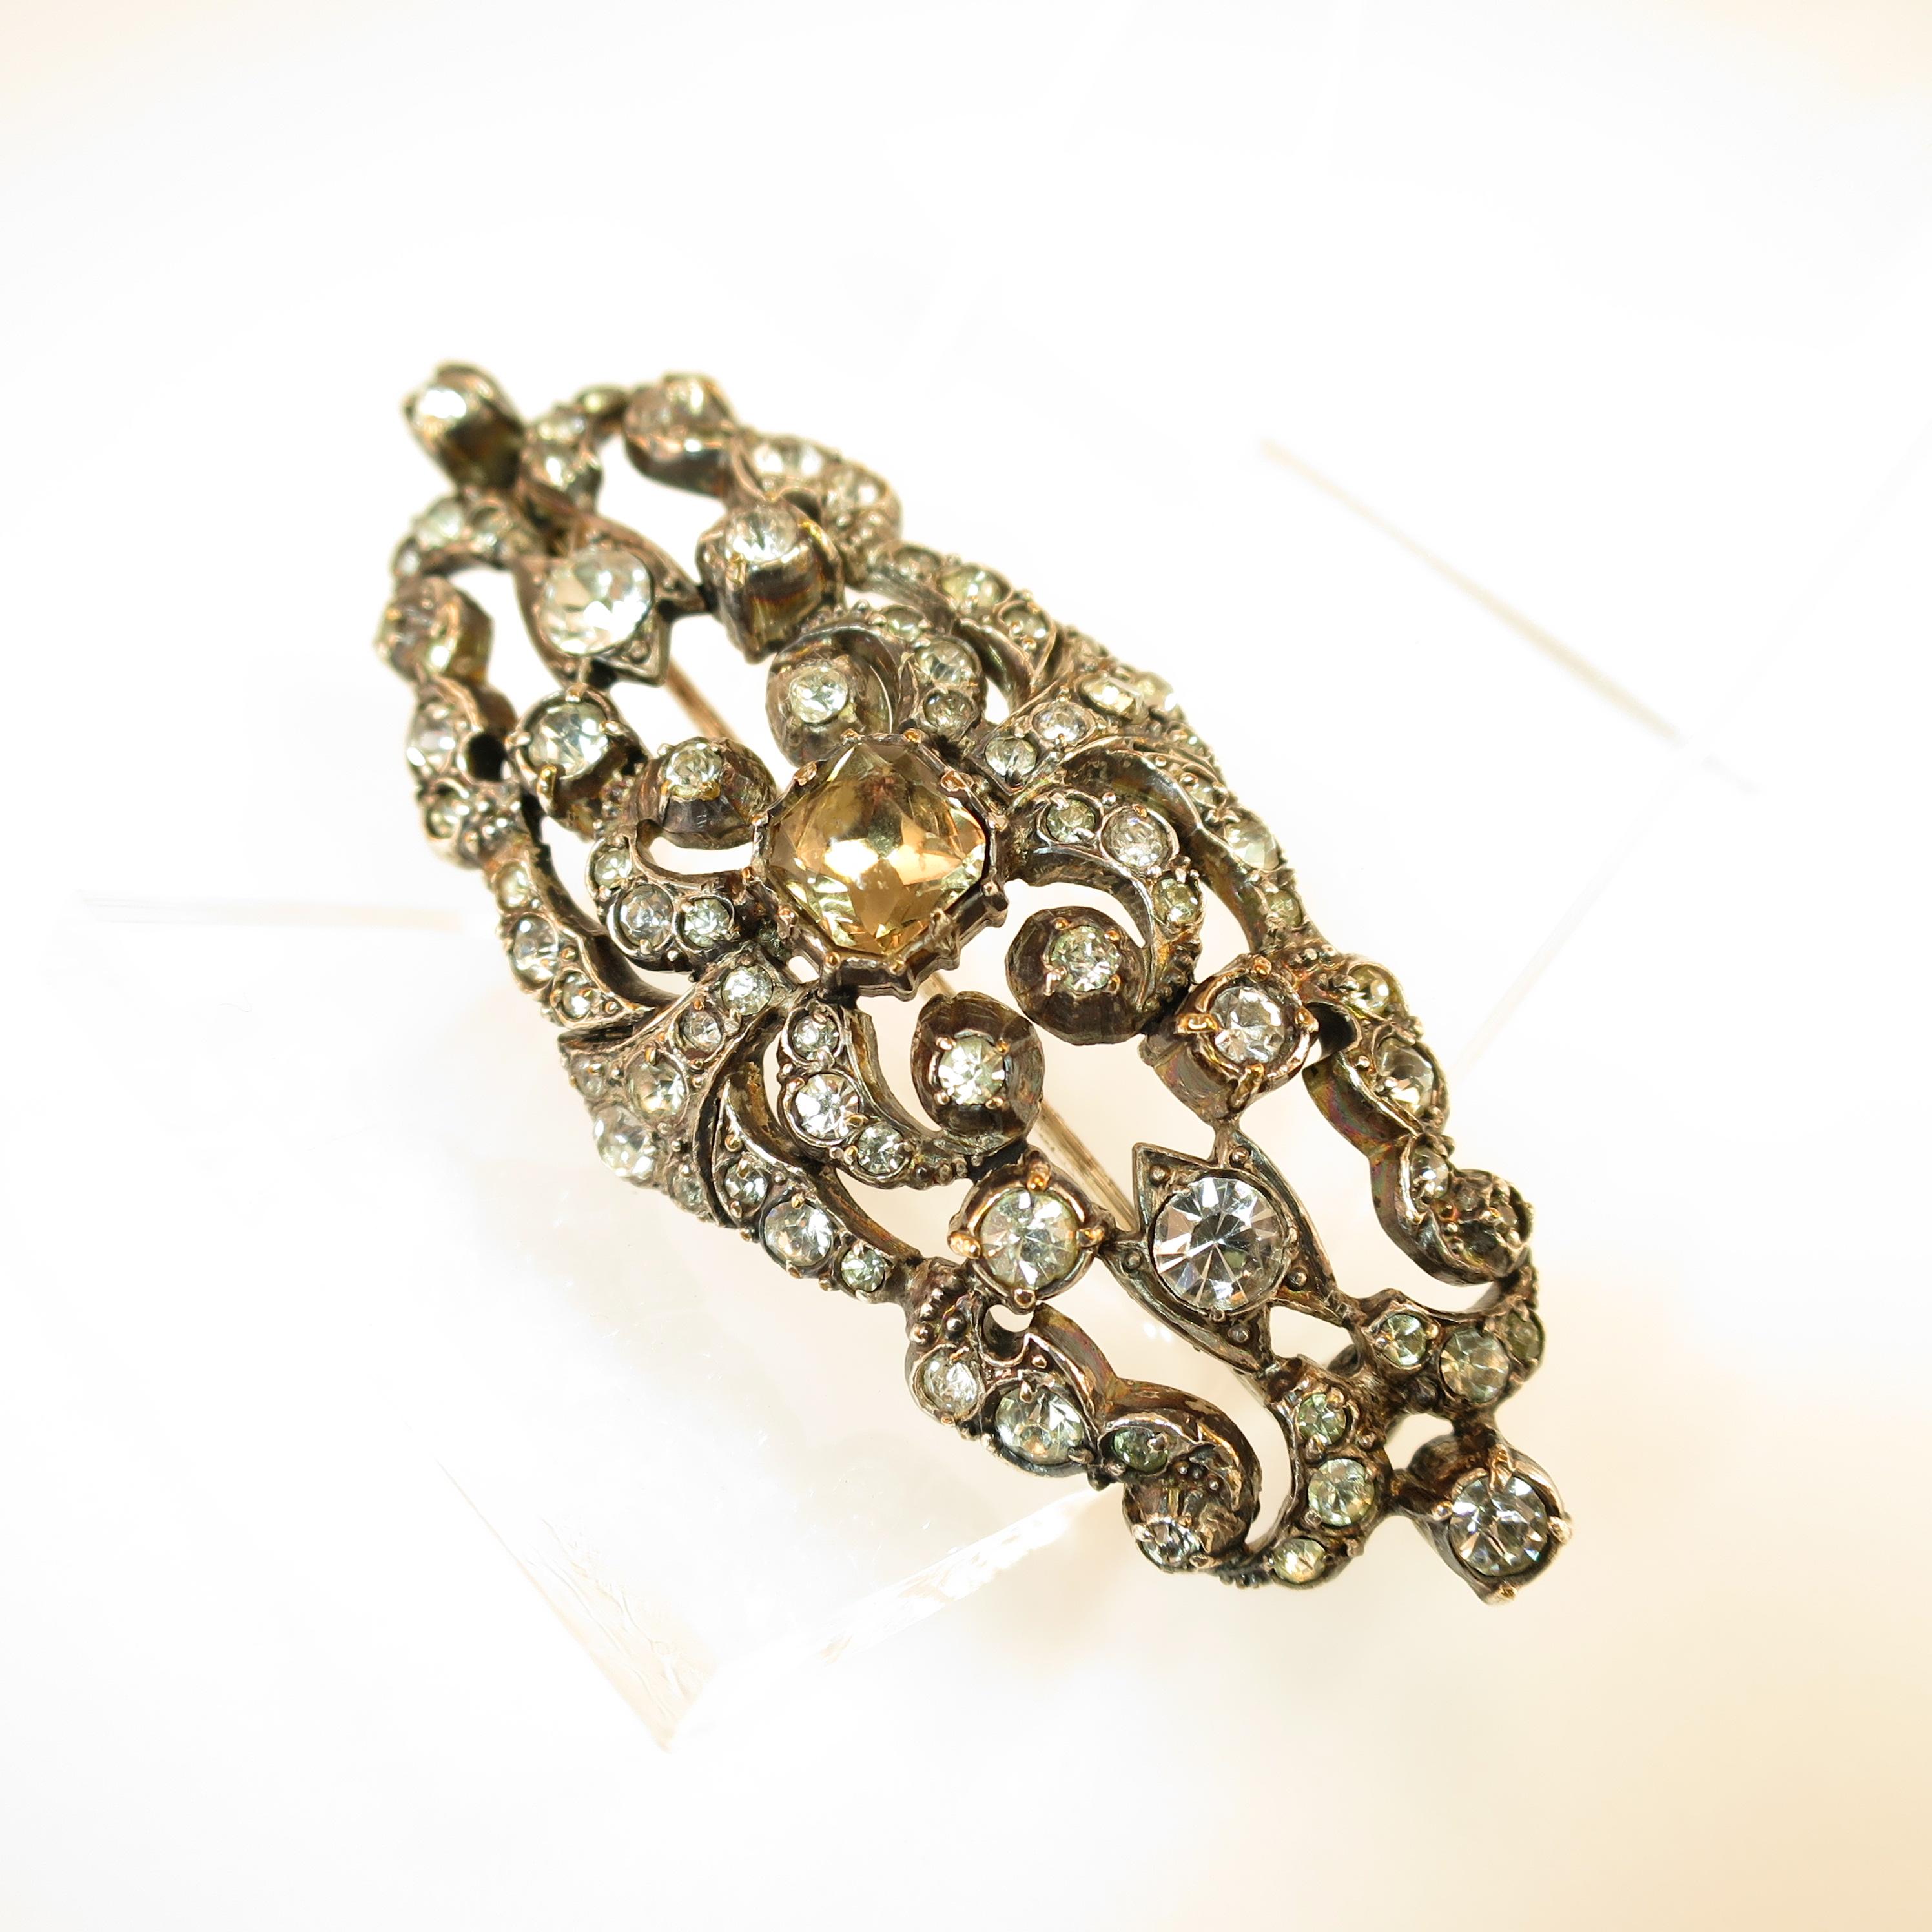 Edwardian Hand-Wrought Sterling & French Paste Brooch Circa 1905 In Good Condition For Sale In Burbank, CA